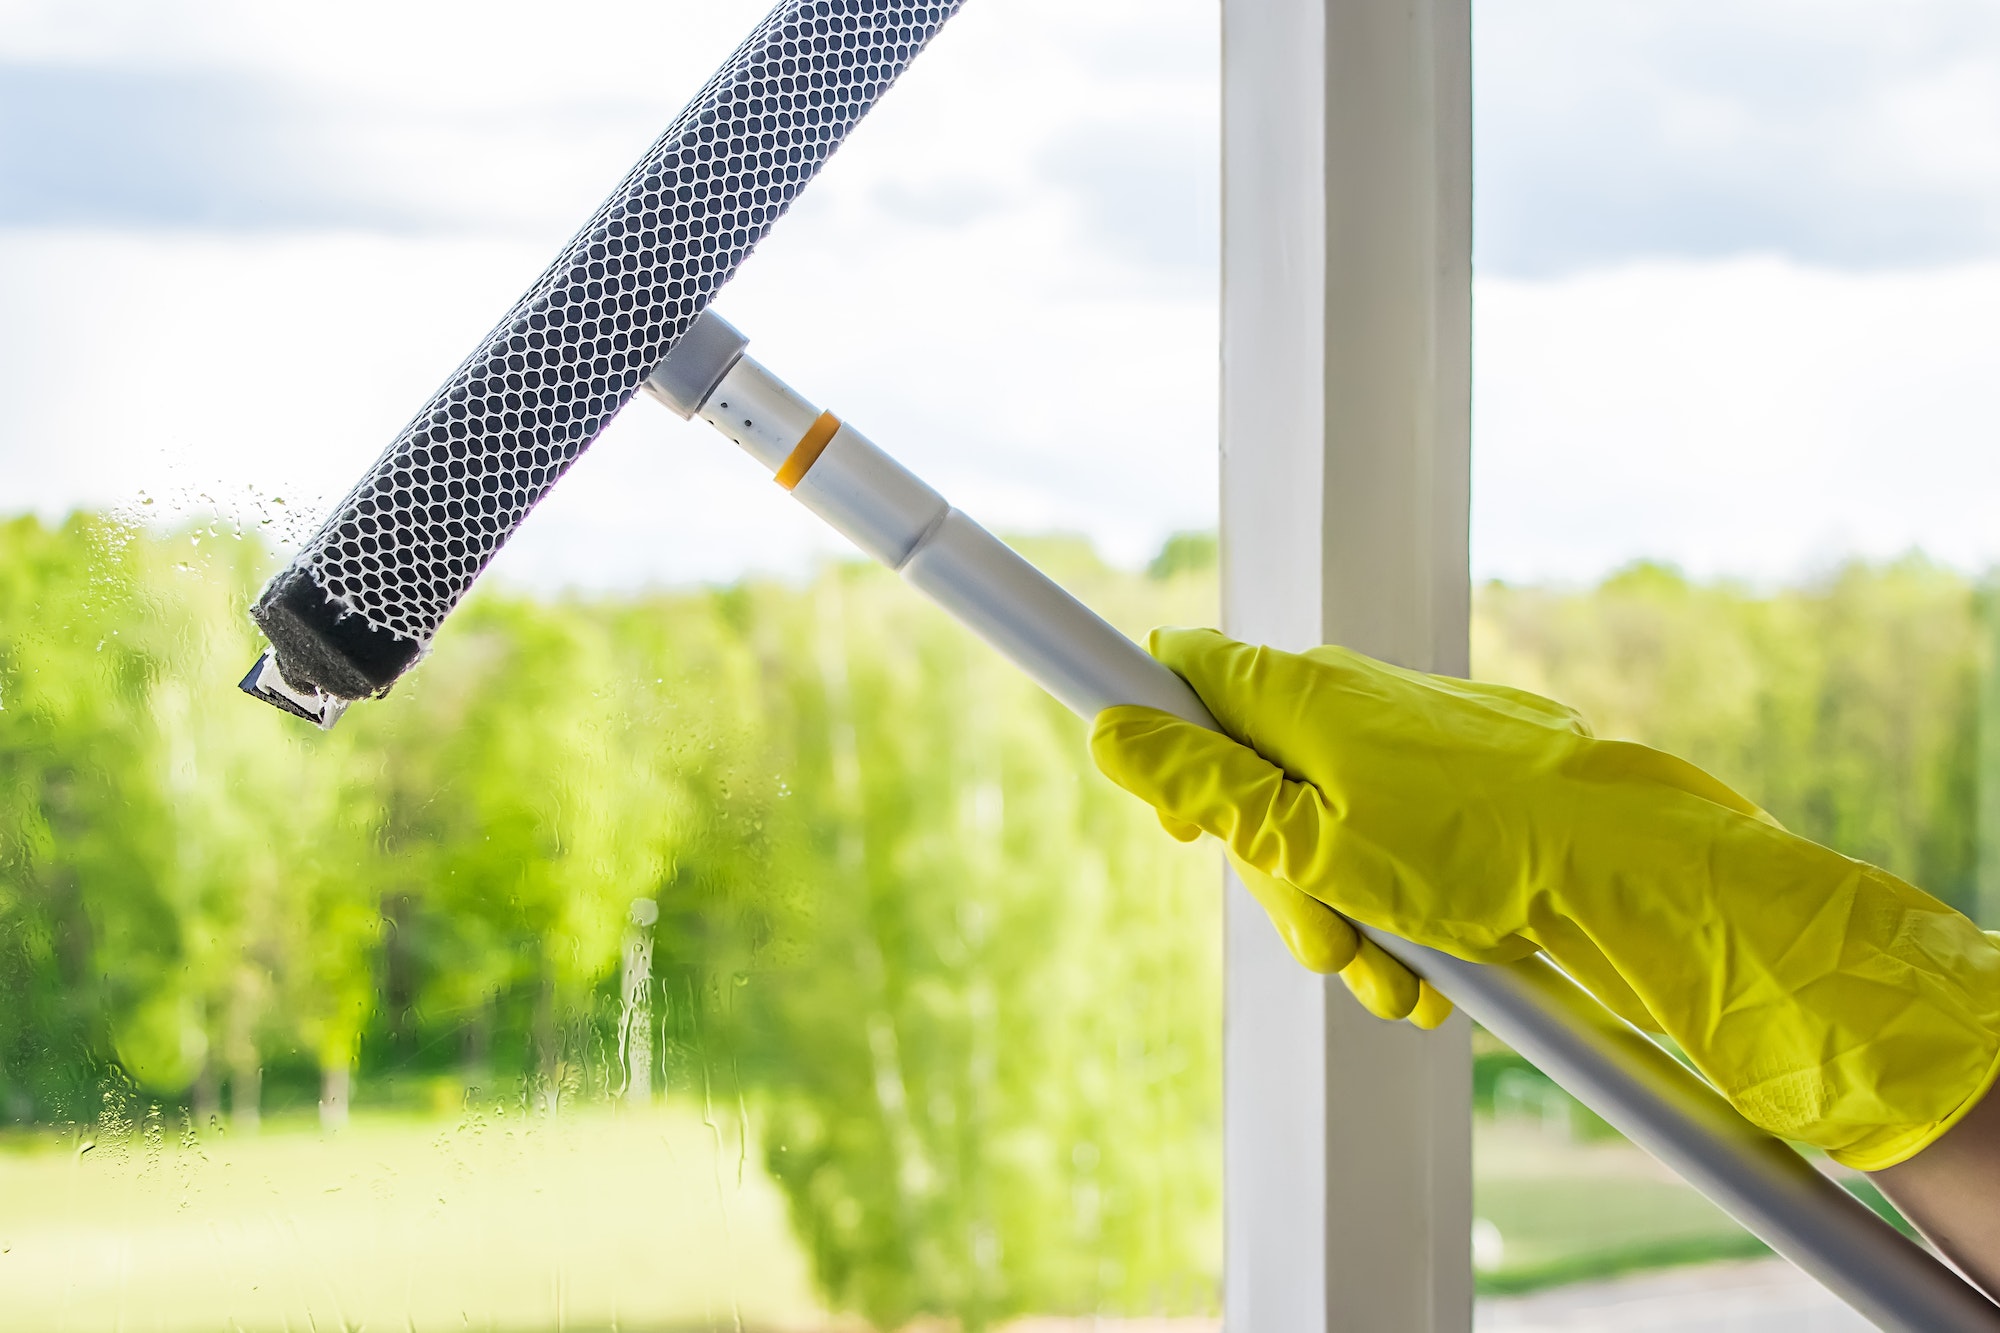 Window cleaning. A woman sprays a cleaner on glass. Housework concept.